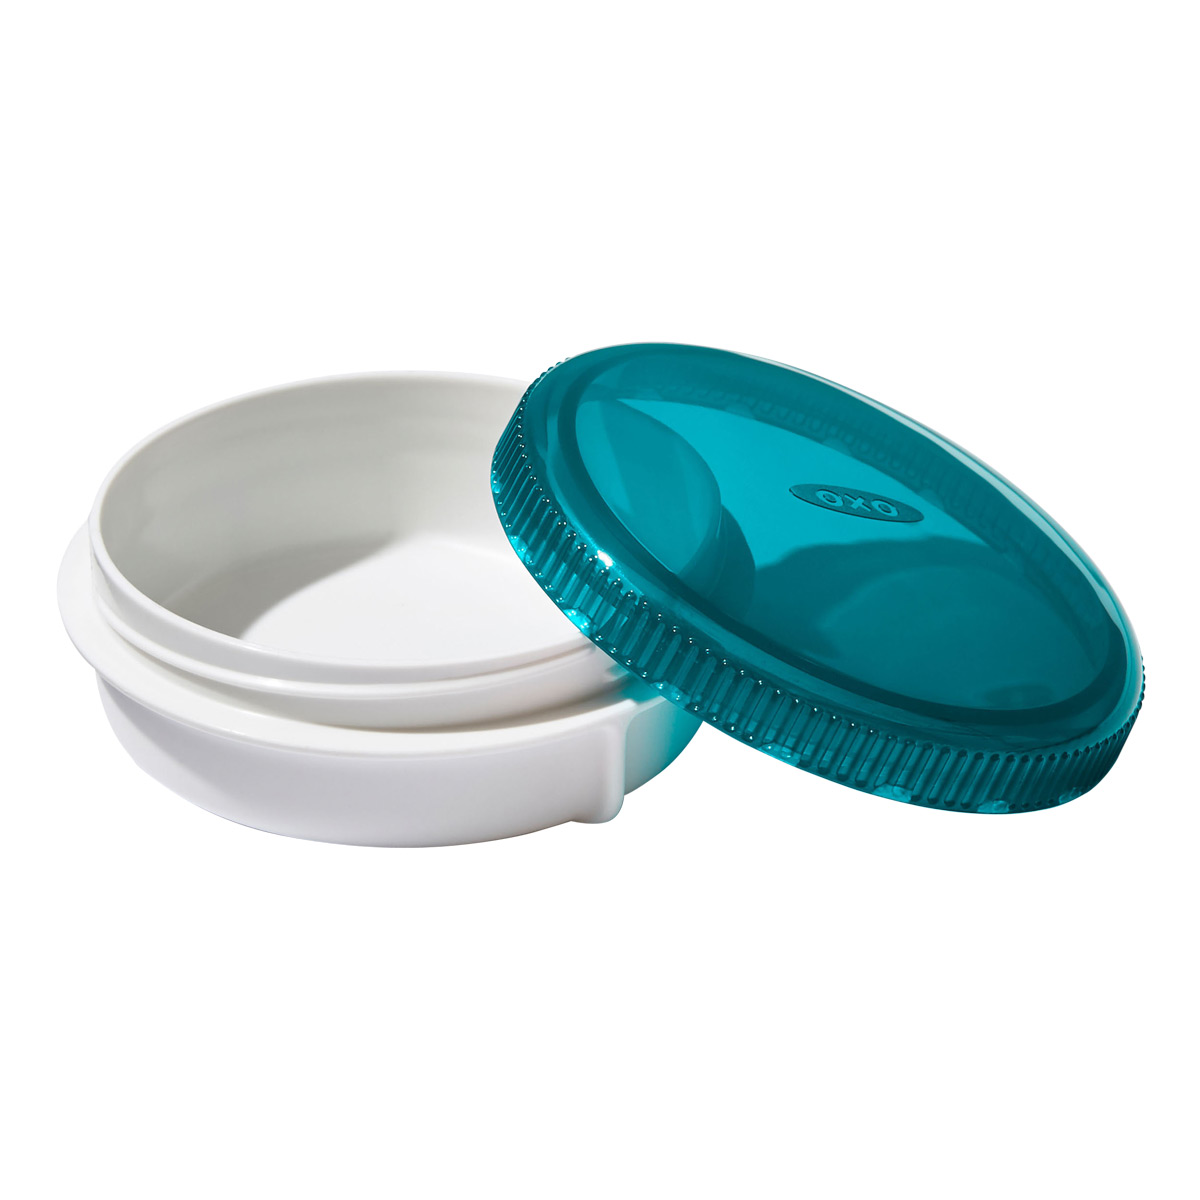 https://www.containerstore.com/catalogimages/428538/10085069-OXO-Condiment-VEN5.jpg